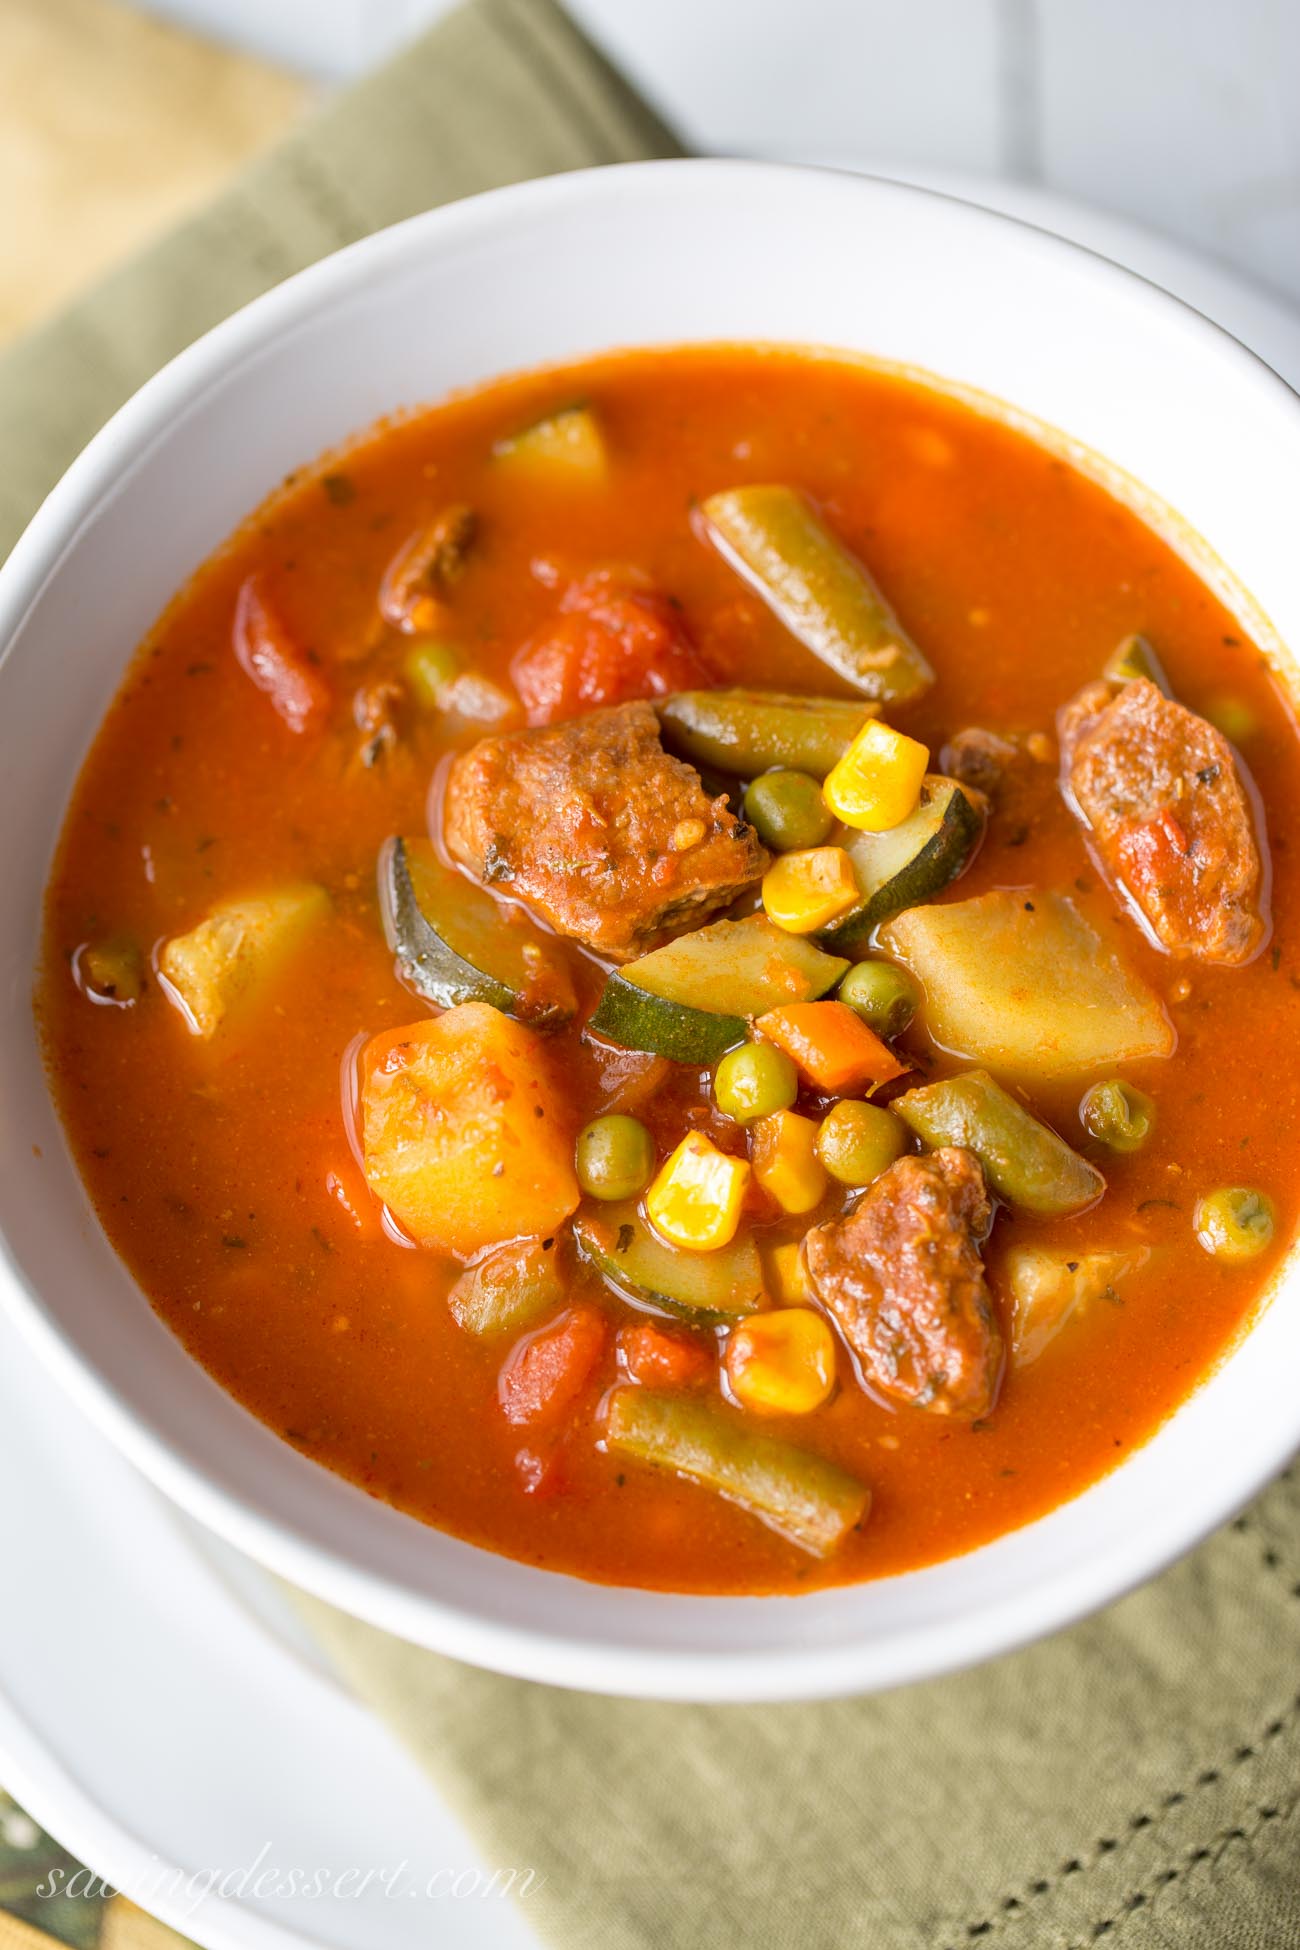 Vegetable Beef Soup Recipes Homemade - Best Lunch Ideas: Vegetable Beef ...